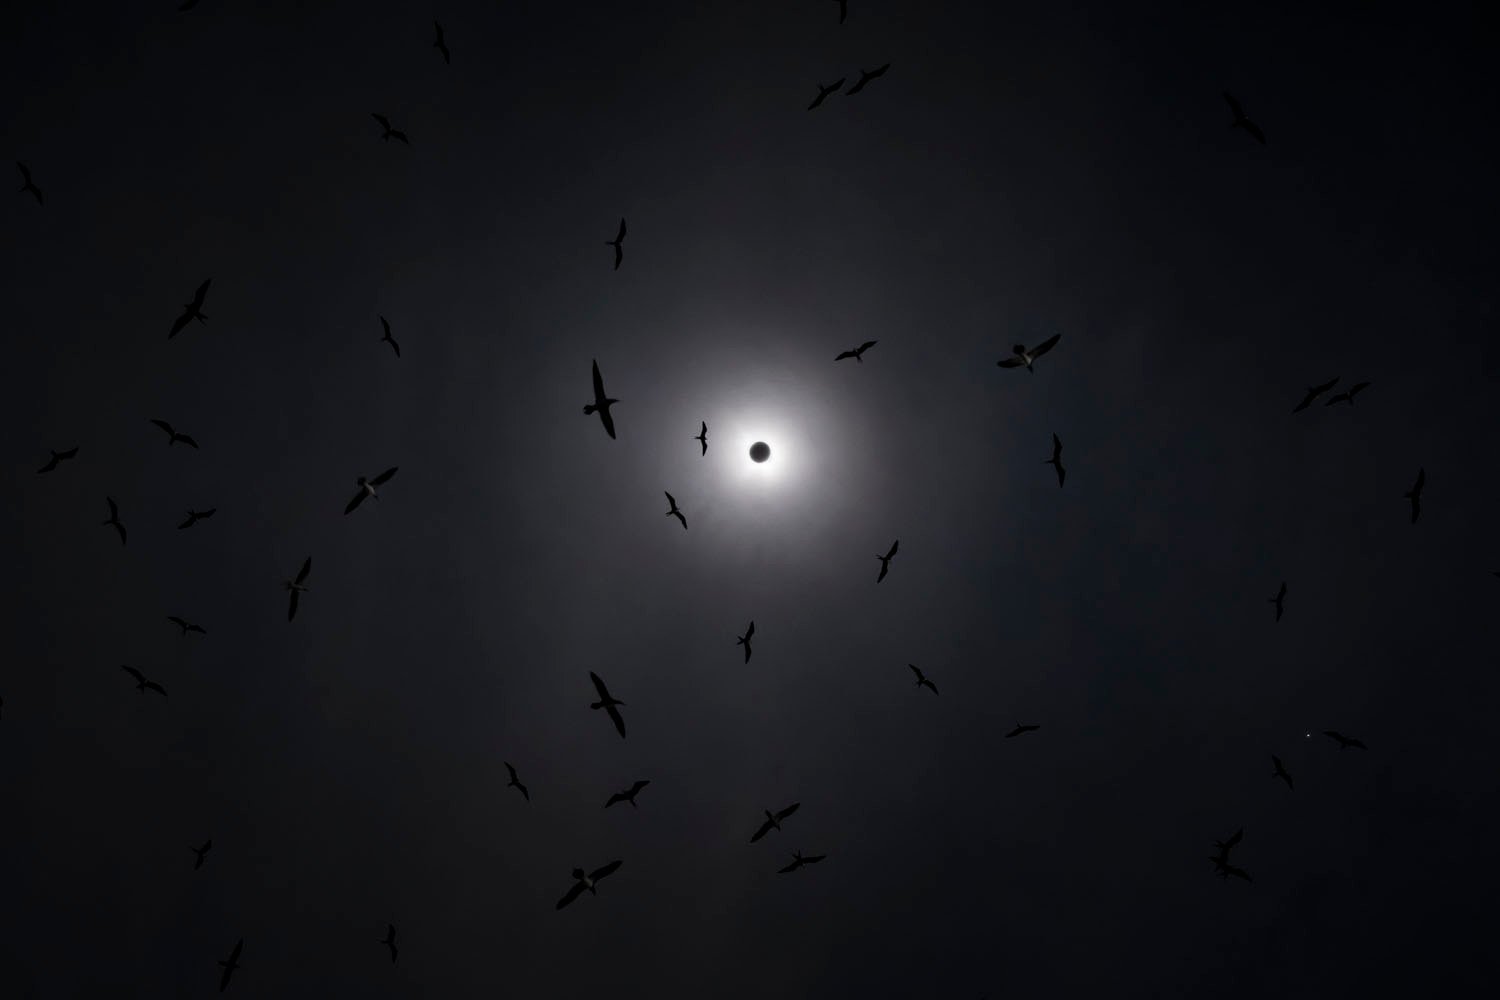 Silhouettes of numerous birds flying around a bright solar eclipse against a dark sky.